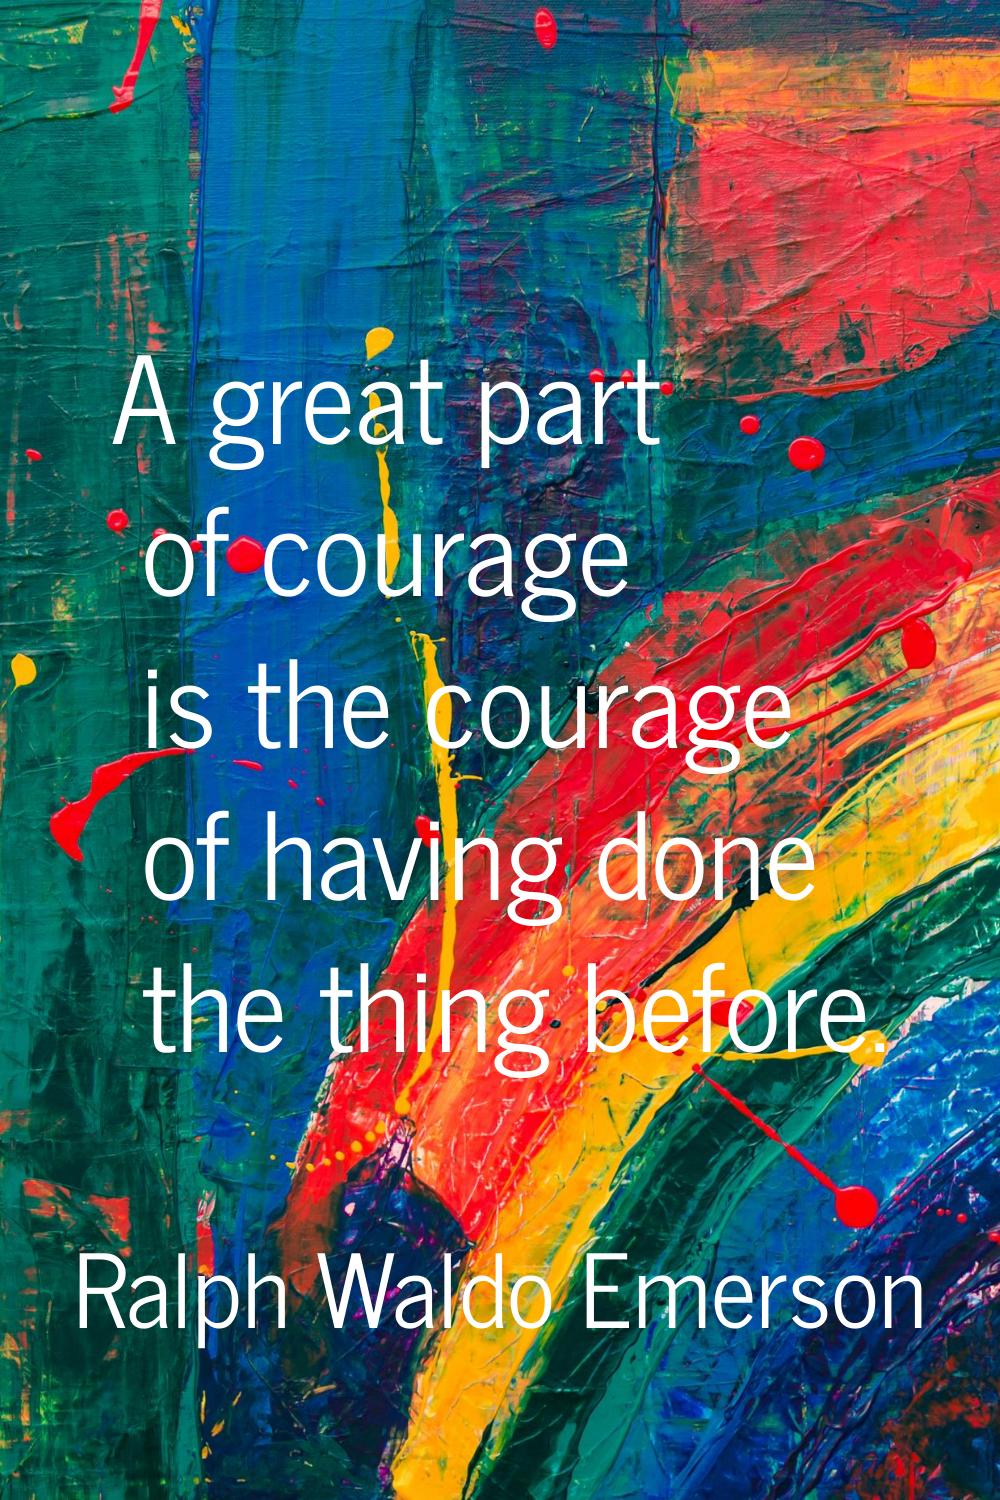 A great part of courage is the courage of having done the thing before.